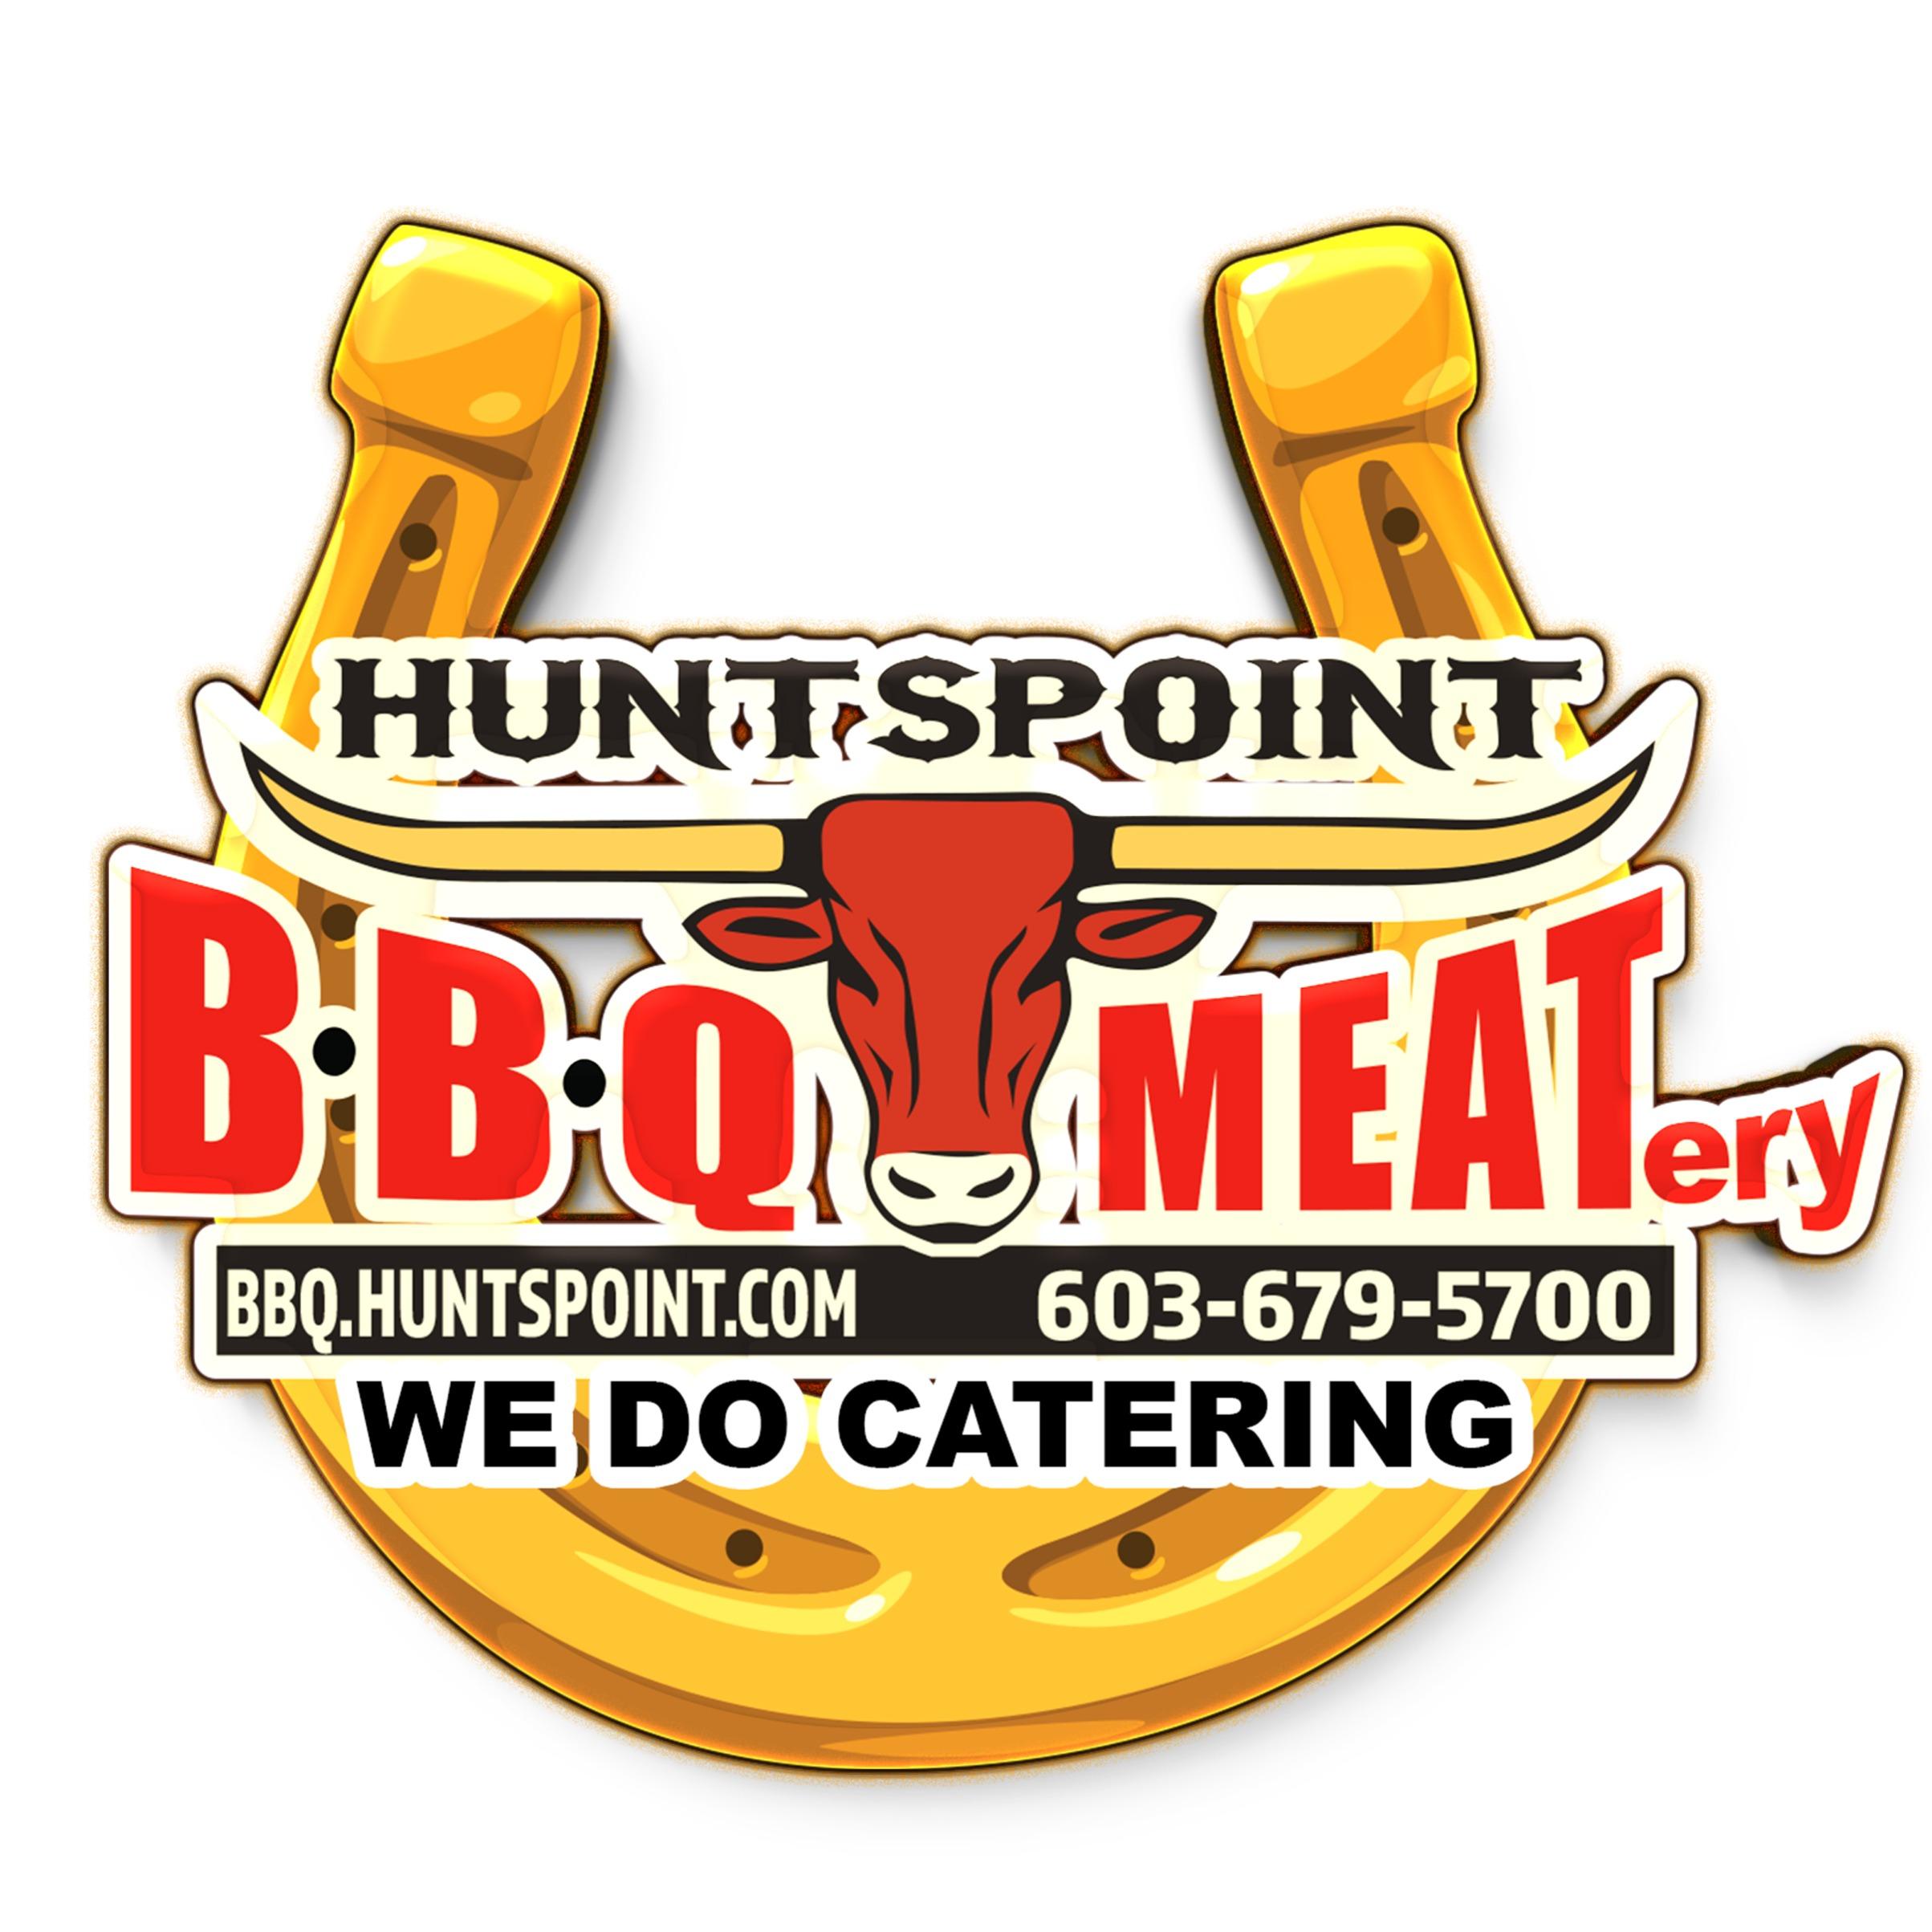 Huntspoint BBQ and Meat'ery - Epping, NH 03042 - (603)679-5700 | ShowMeLocal.com